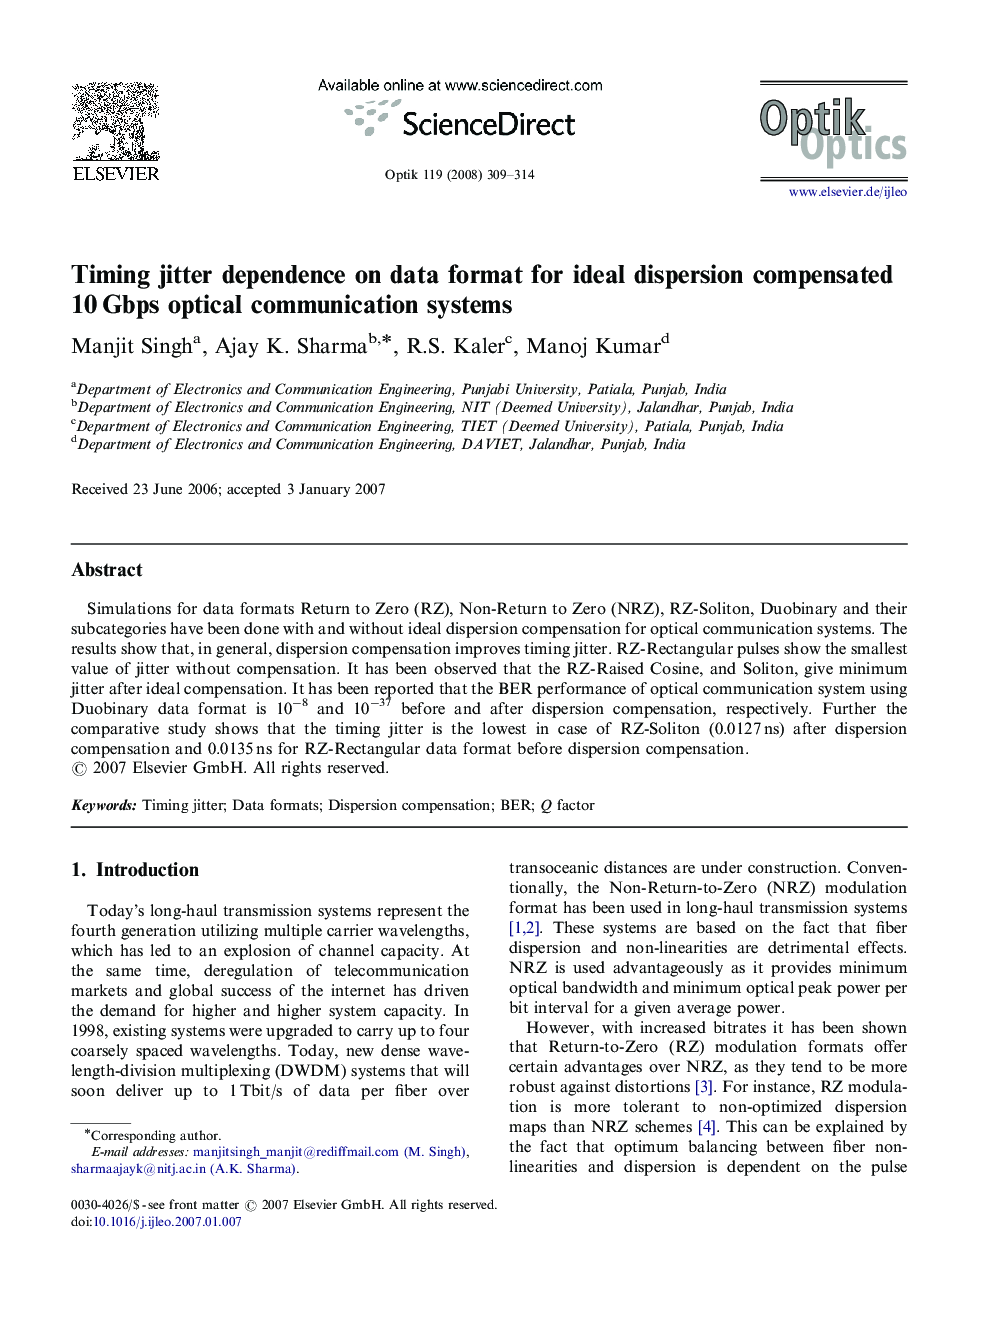 Timing jitter dependence on data format for ideal dispersion compensated 10 Gbps optical communication systems